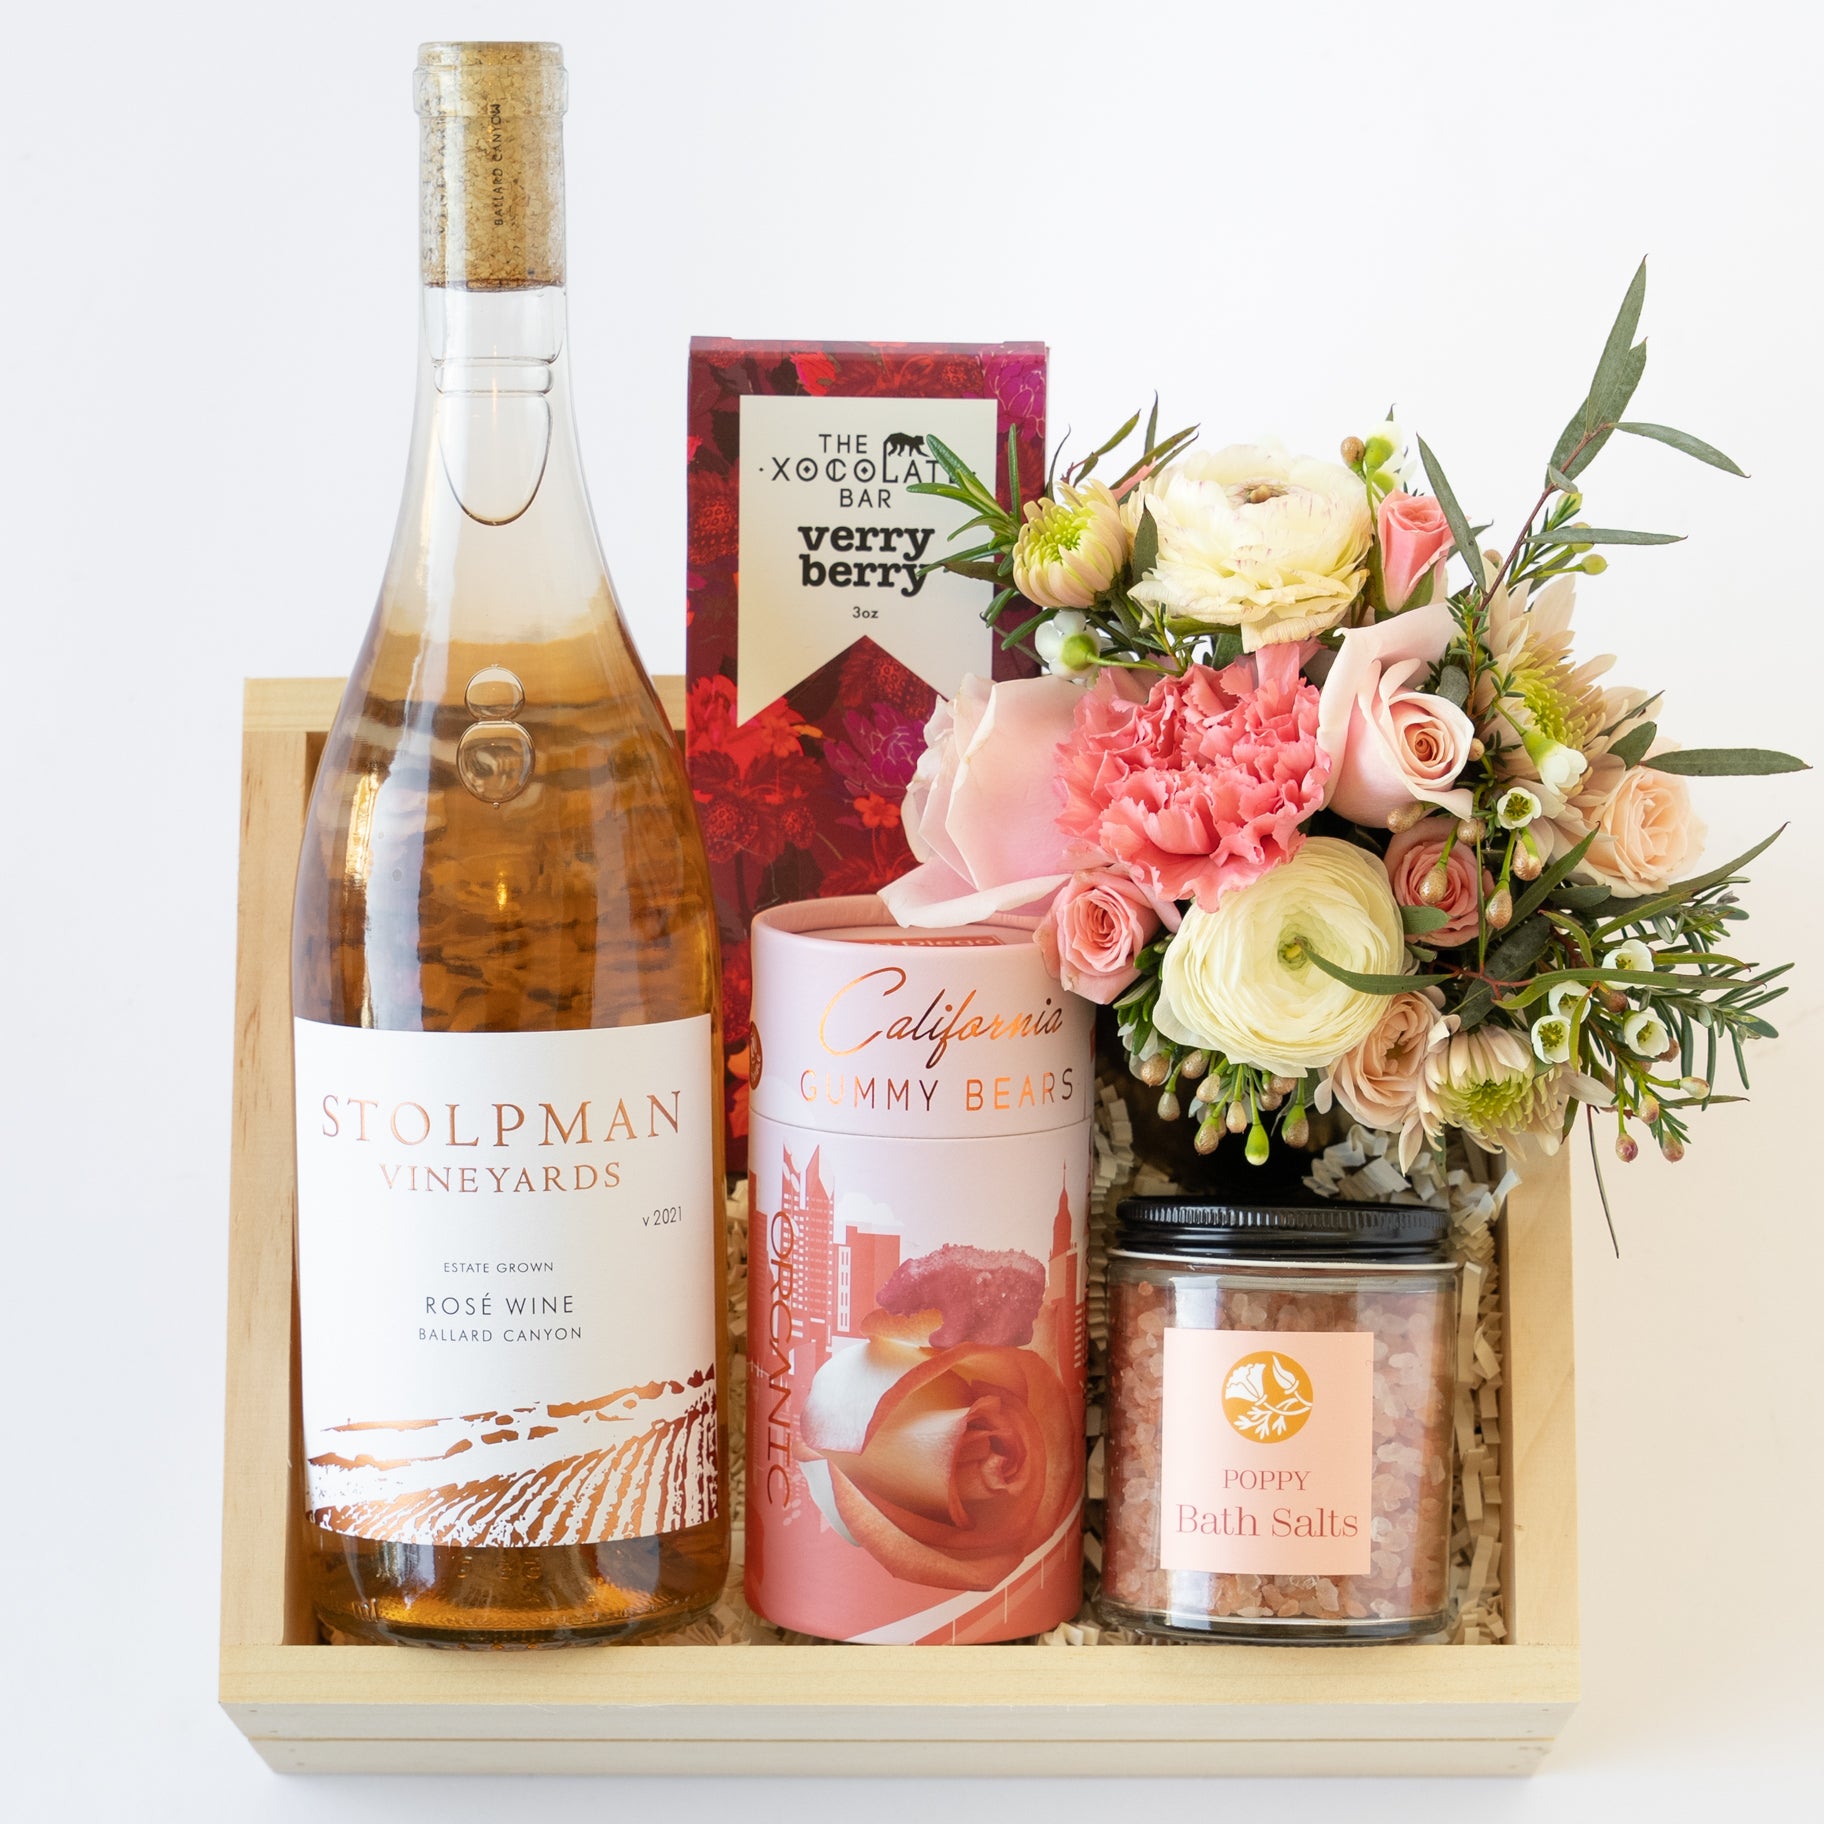 Stolpman rose gift box with flowers and California treats